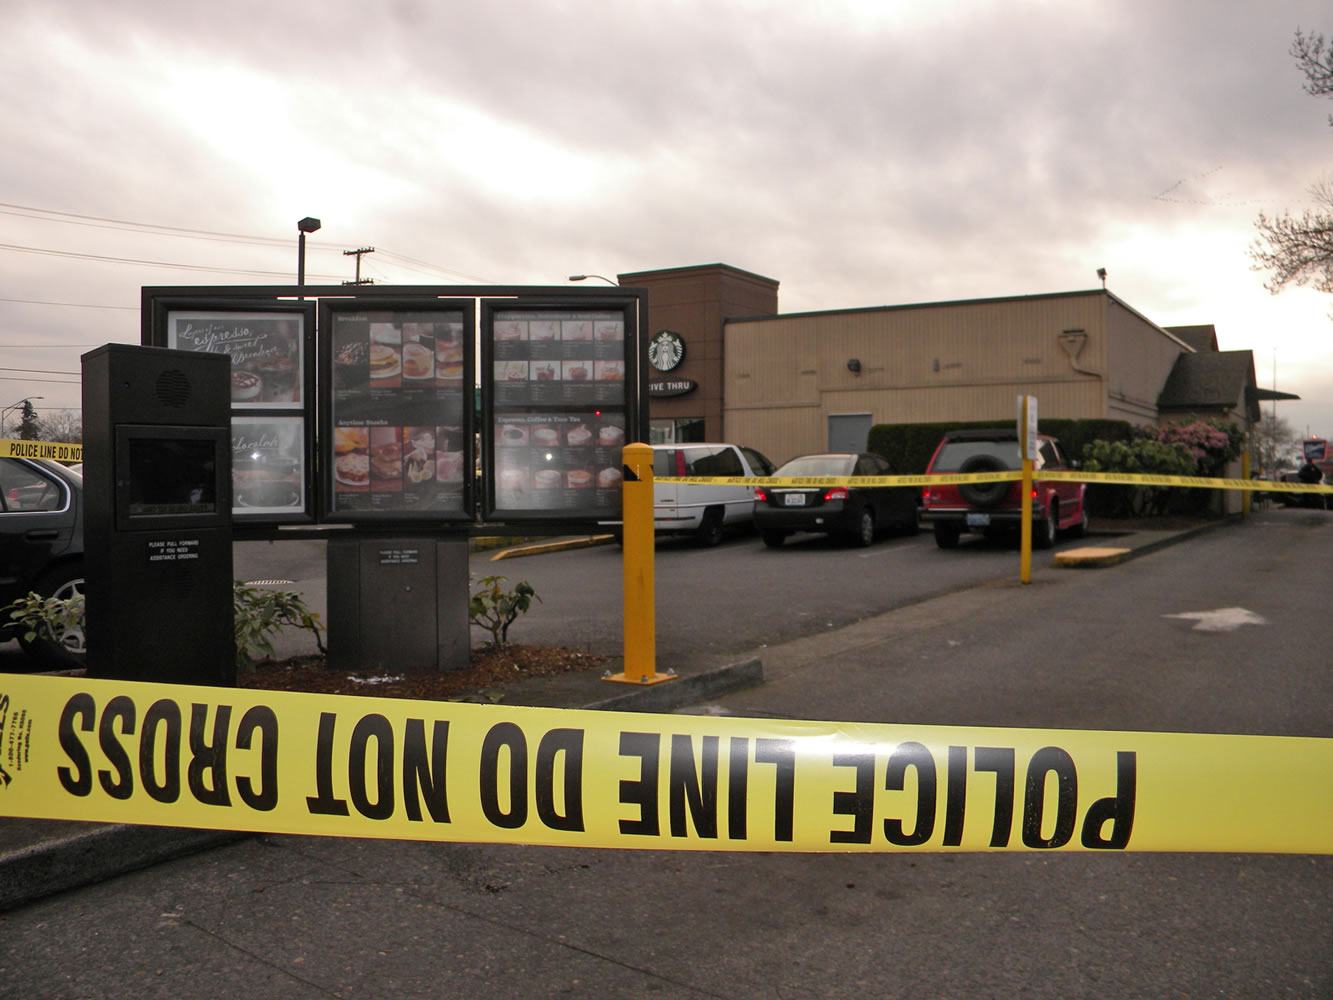 The scene of a stabbing at Starbucks in Cascade Park on Monday evening, March 11, 2013.